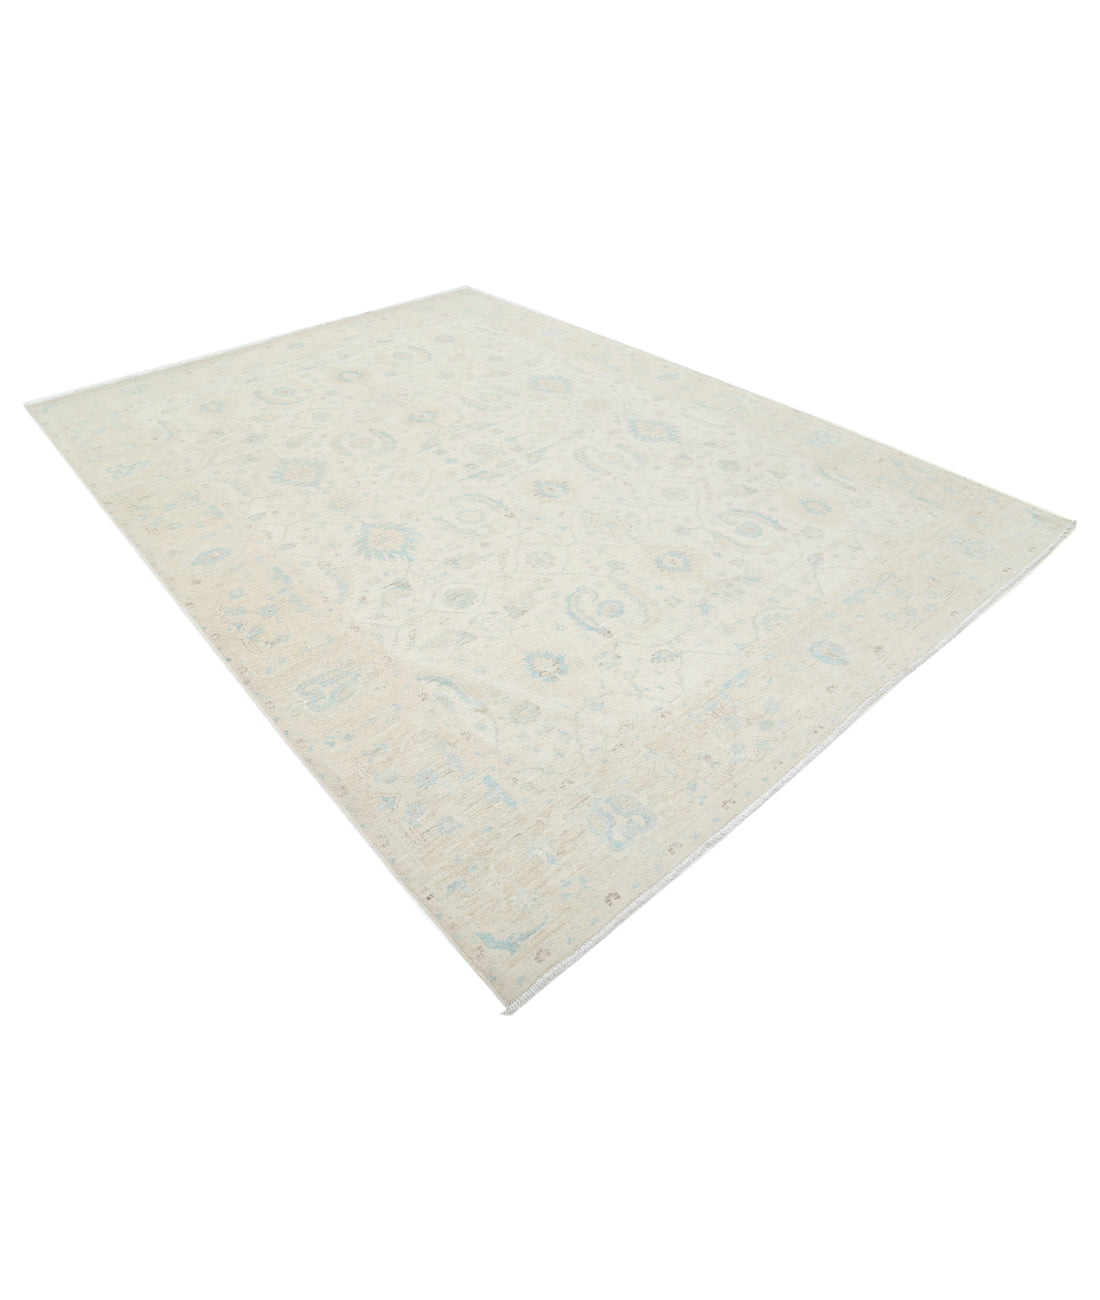 Serenity 7' 11" X 11' 2" Hand-Knotted Wool Rug 7' 11" X 11' 2" (241 X 340) / Ivory / Taupe